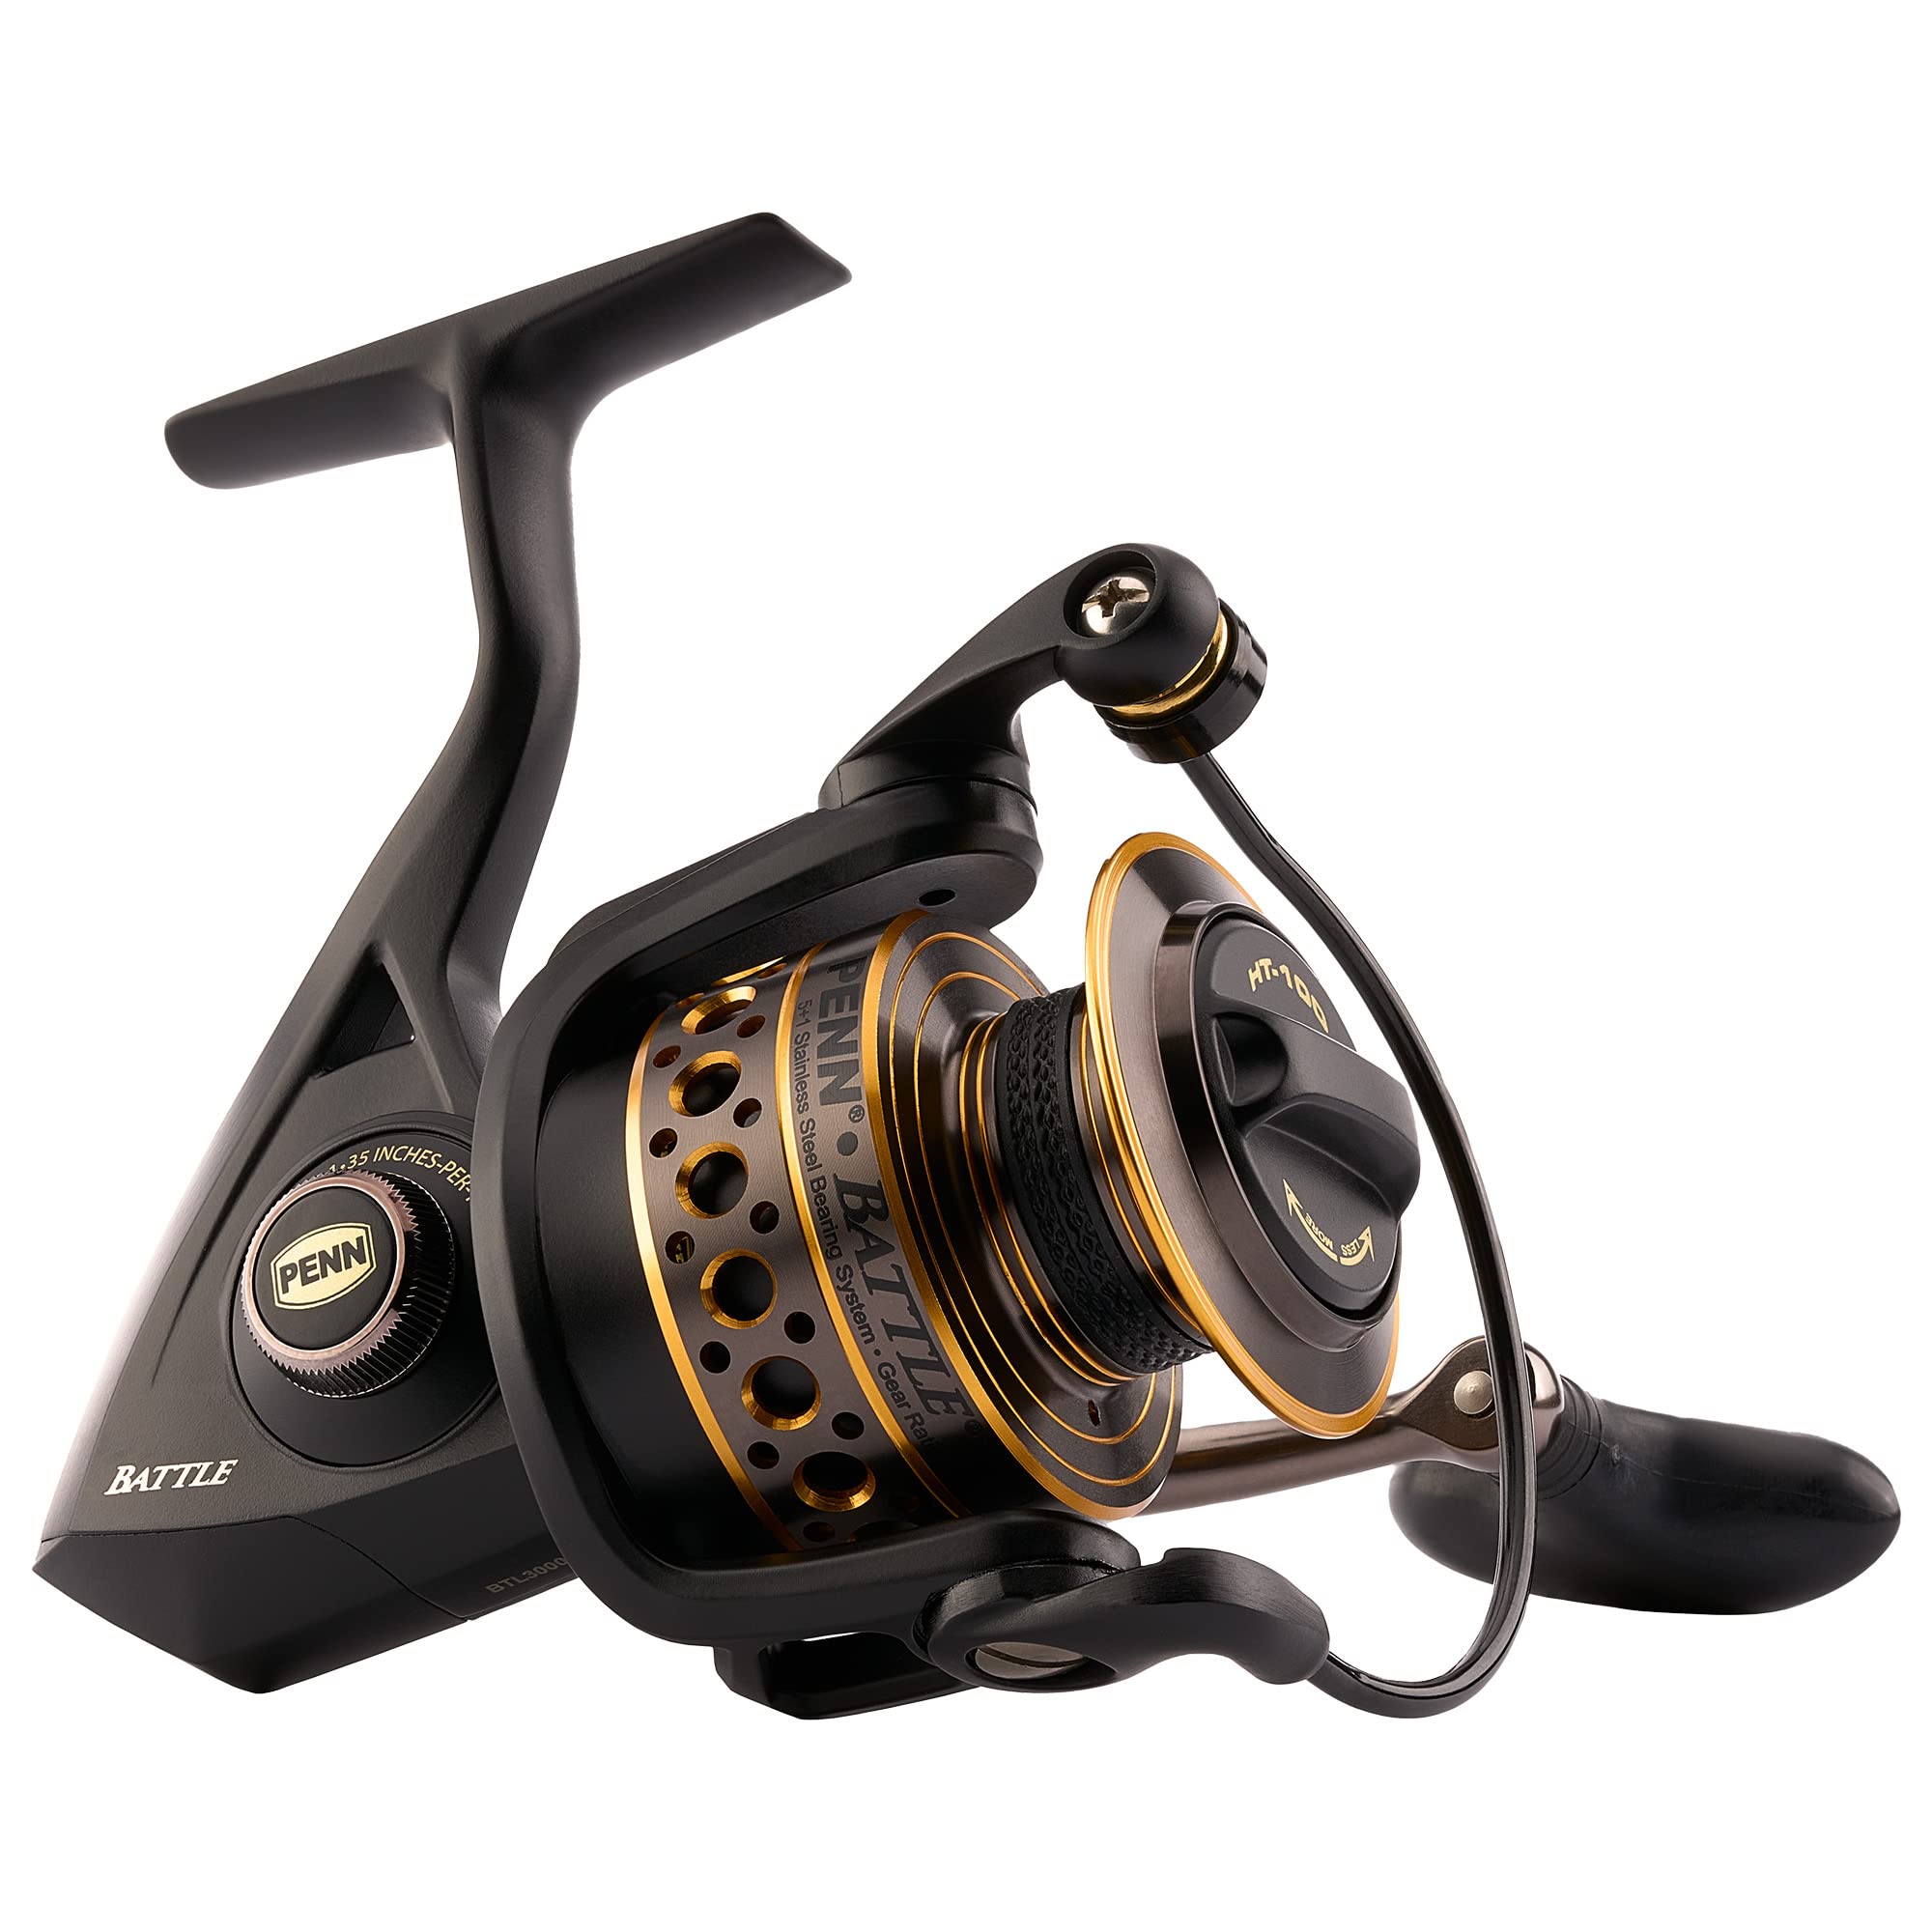 PENN Battle Spinning Reel Kit, Size 5000, Includes Reel Cover and Spare  Anodized Aluminum Spool, Right/Left Handle Position, HT-100 Front Drag  System Battle Reel 6000